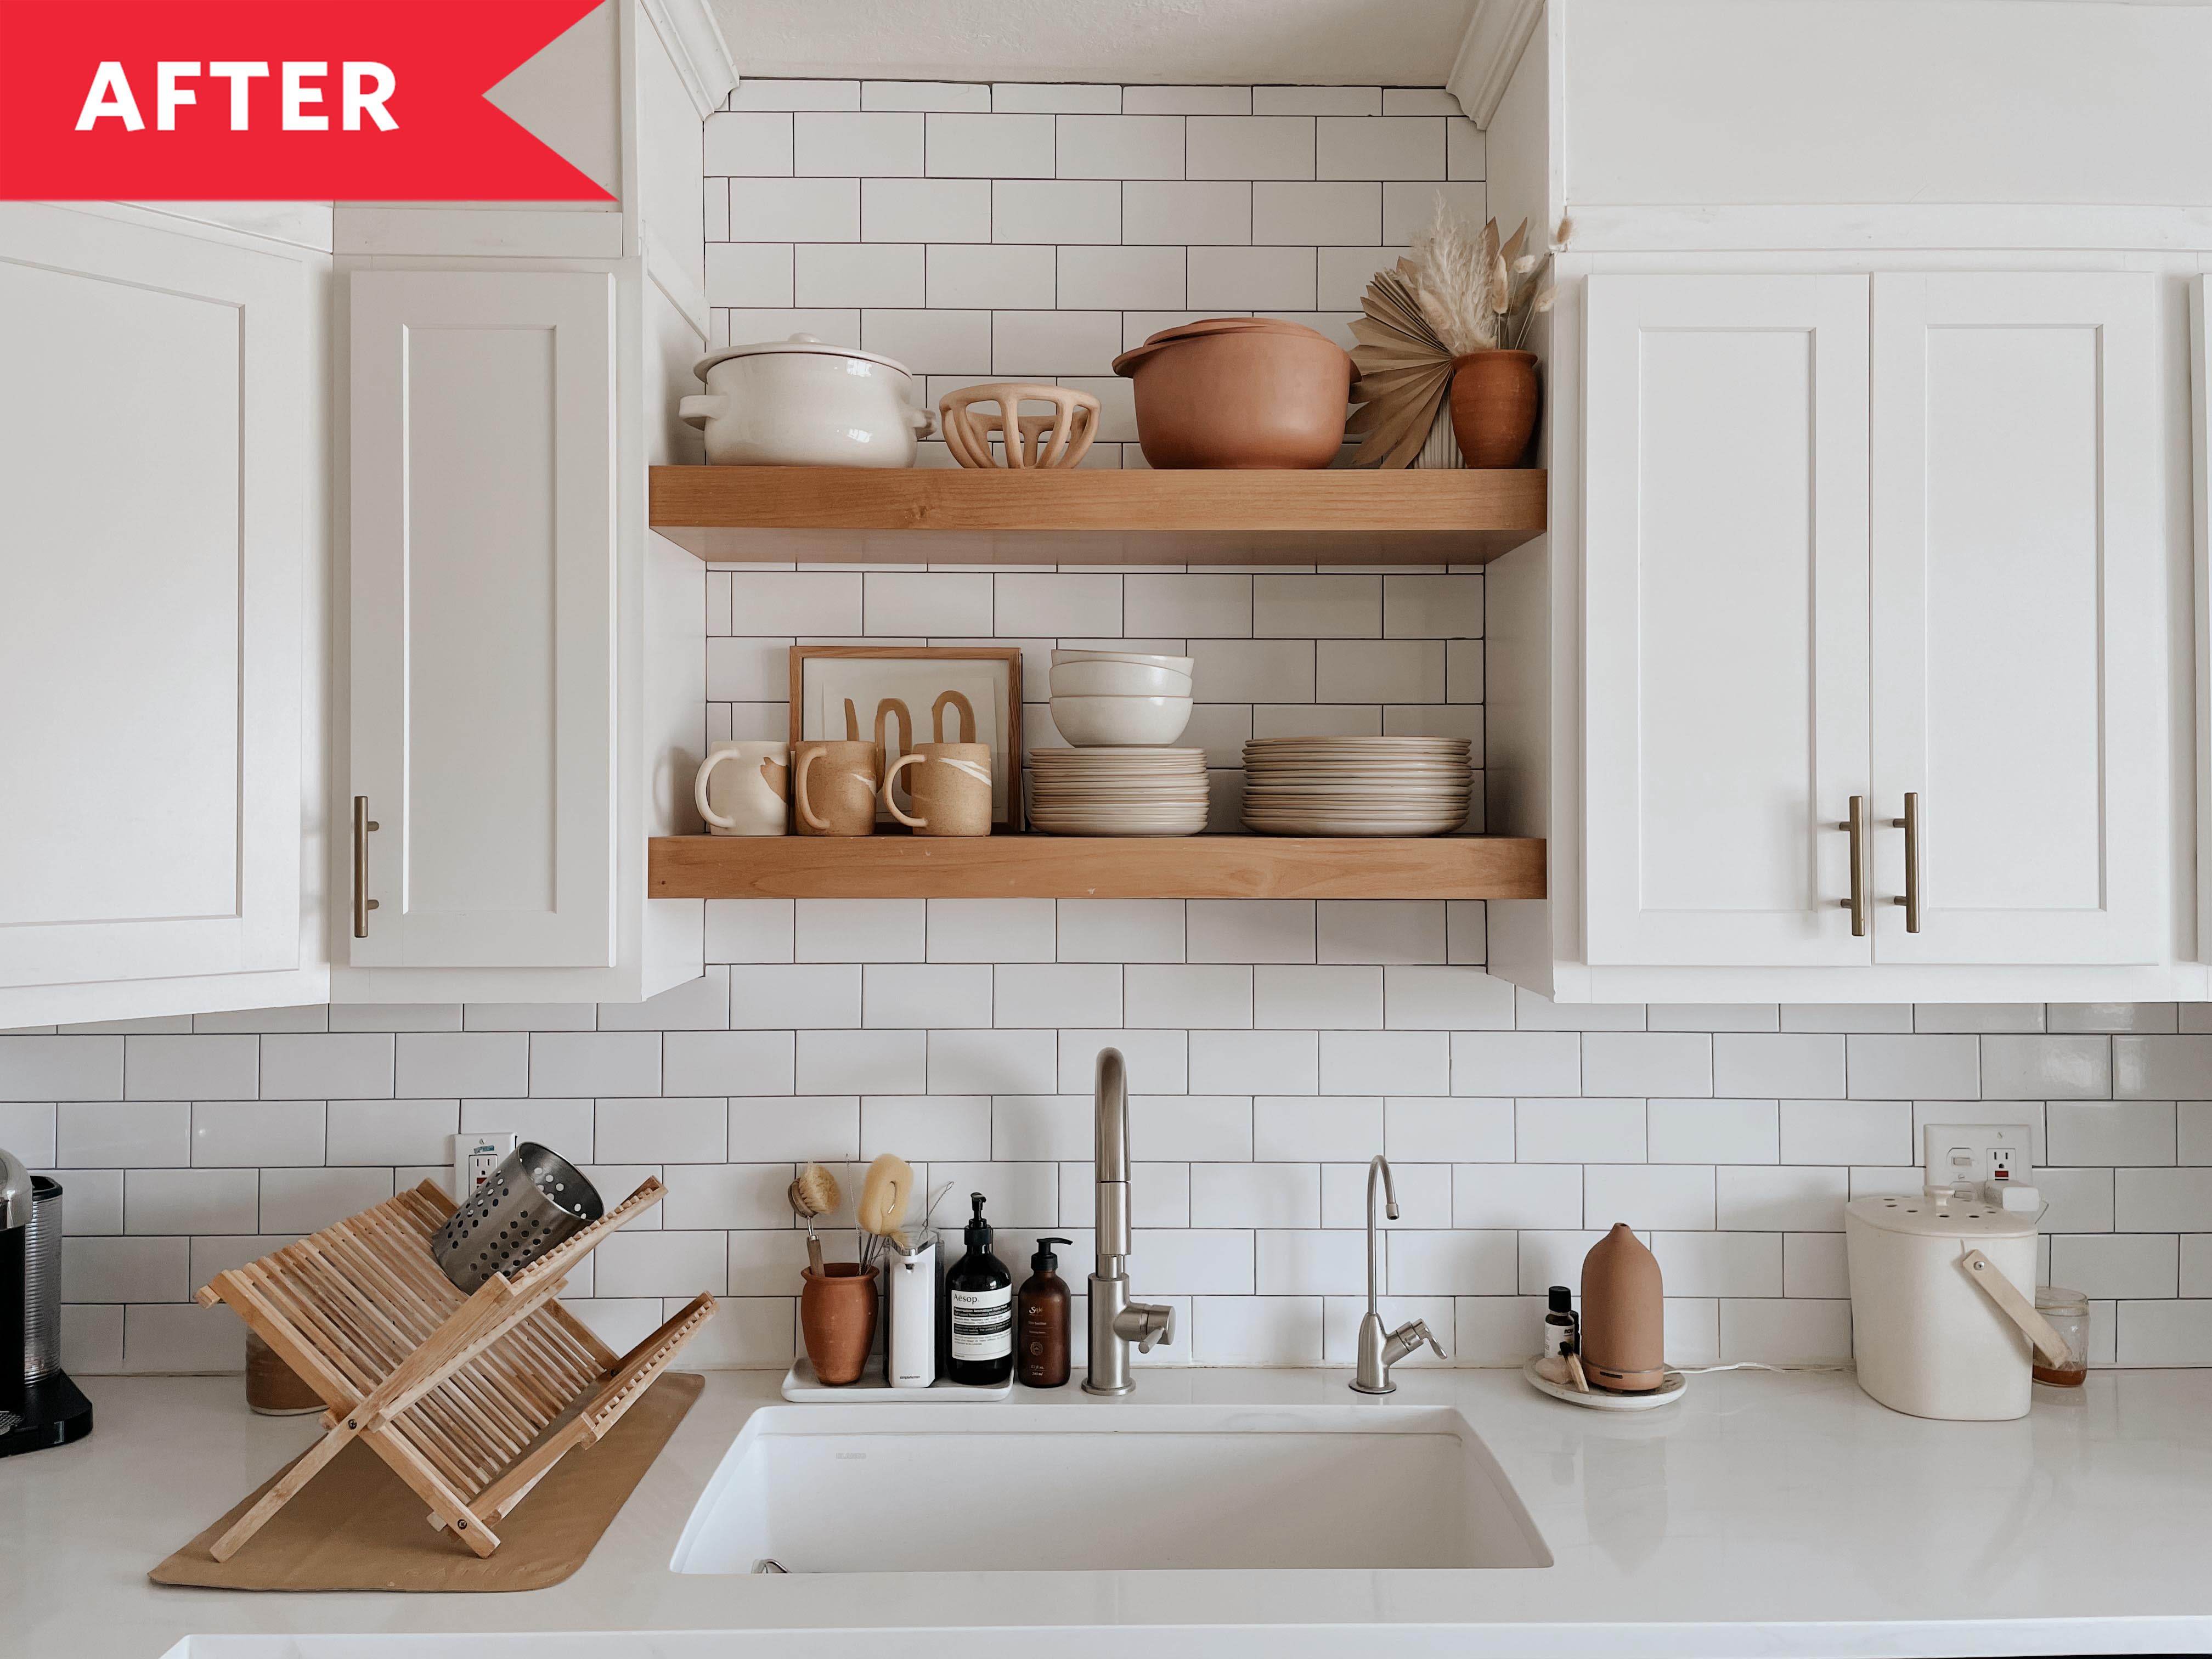 Create More Kitchen Storage: Install Open Shelving Above The Sink